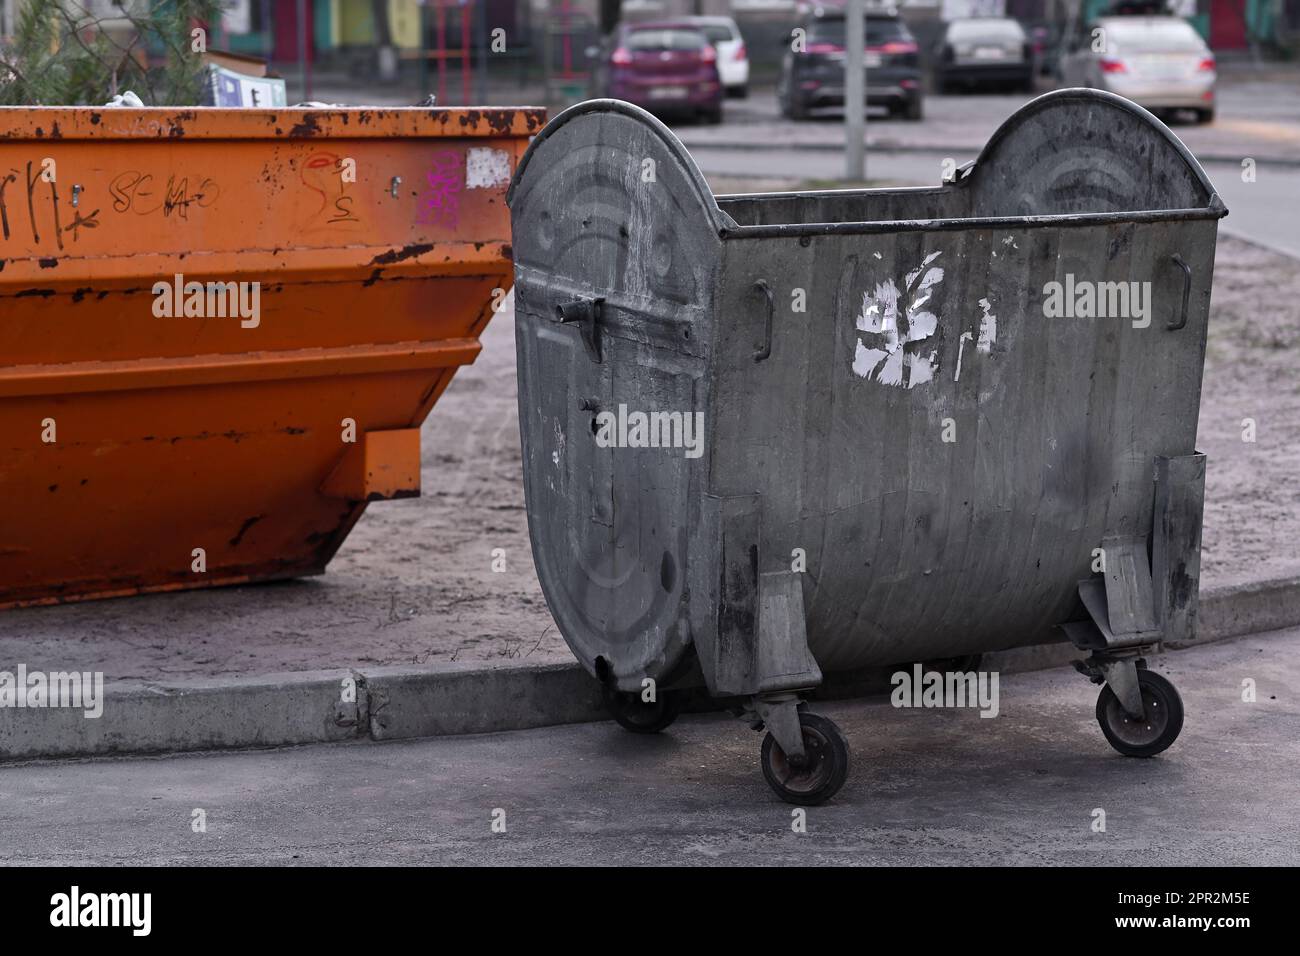 Two metal garbage cans. unsorted garbage. Outdoor. Stock Photo